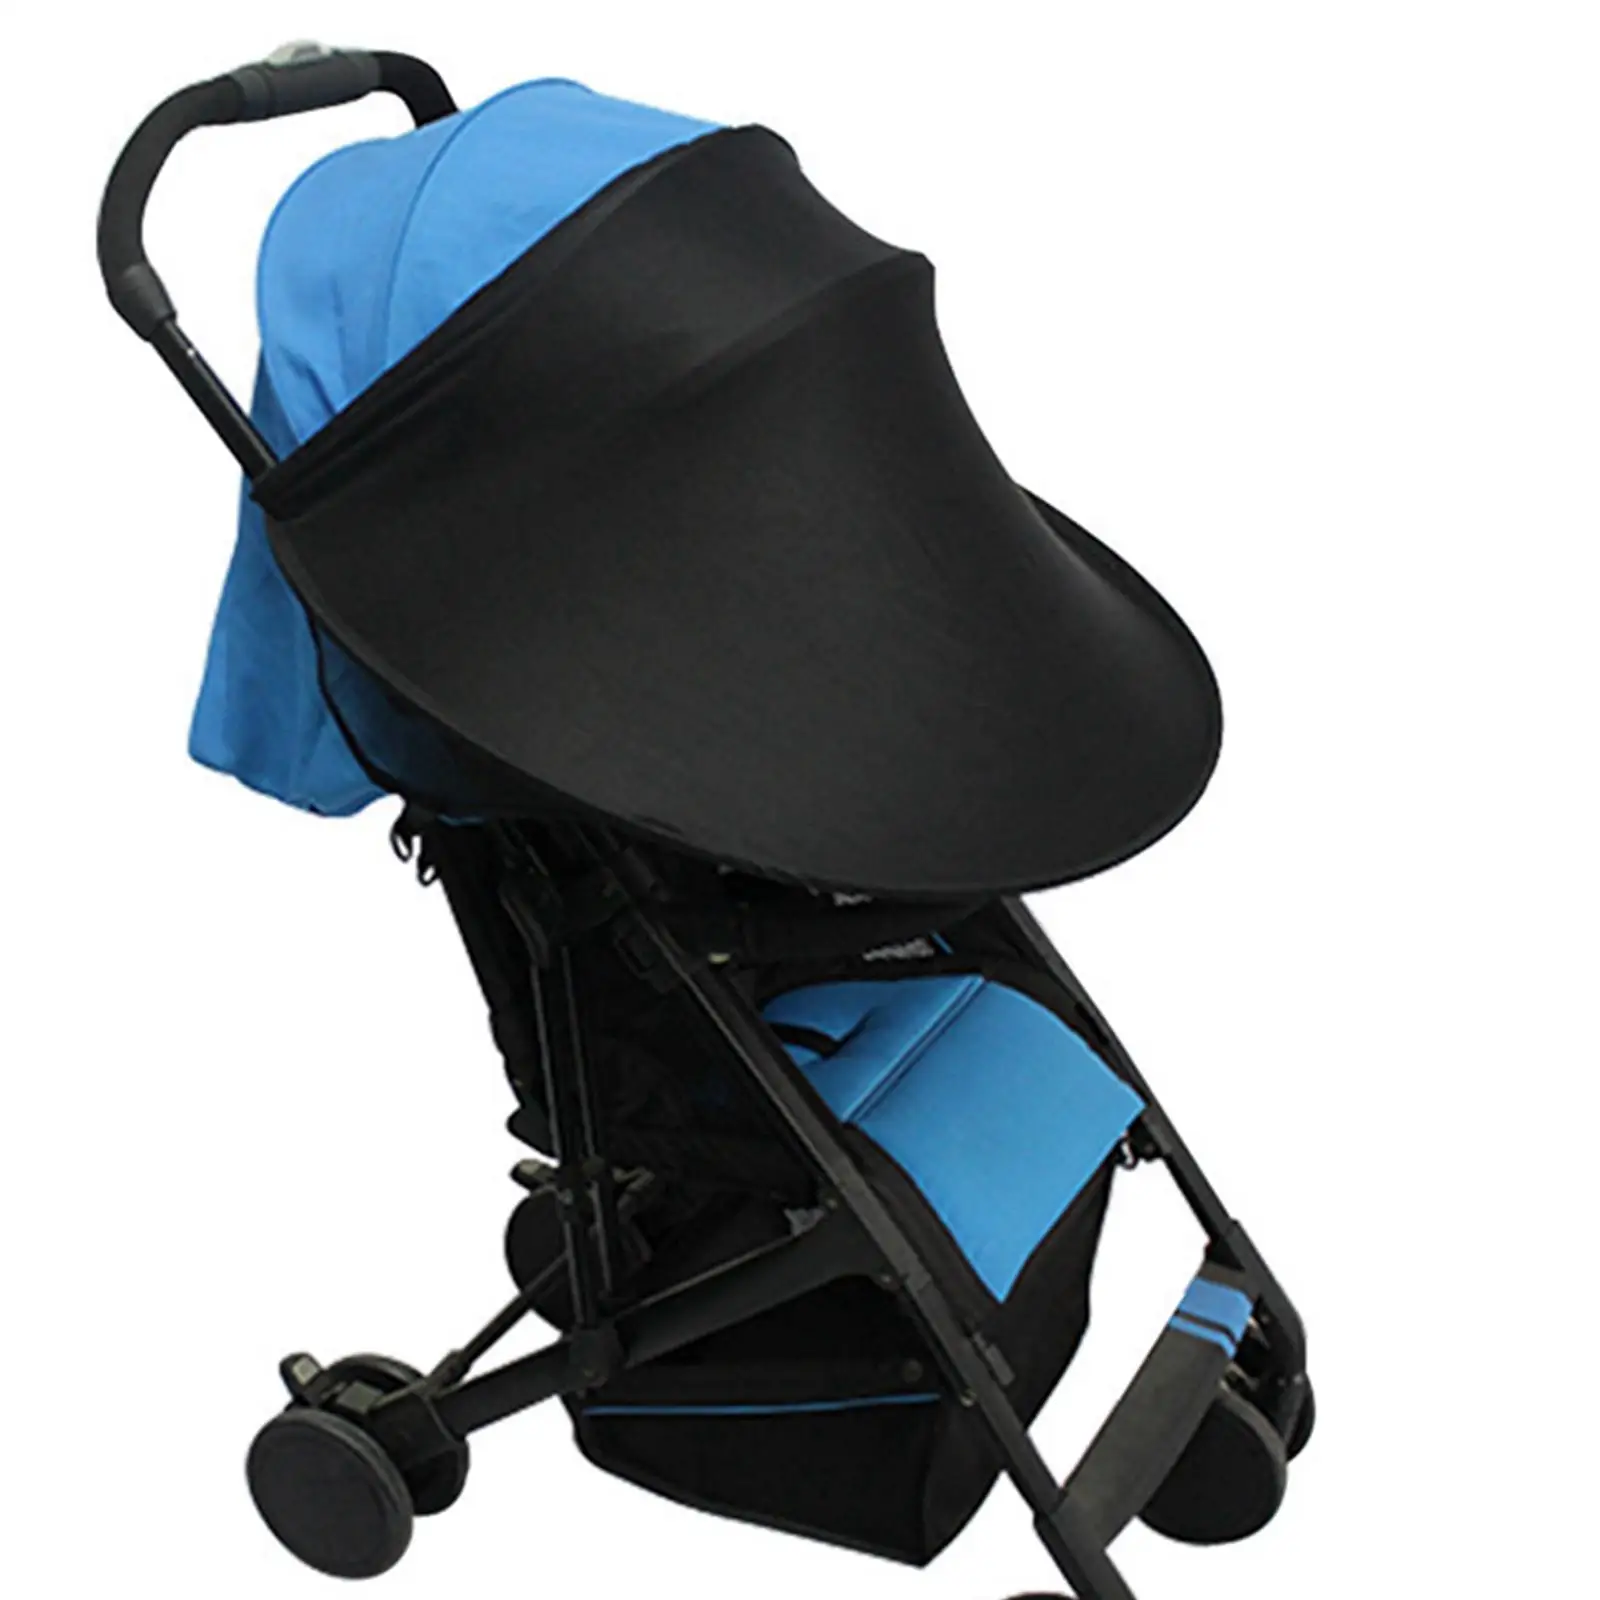 Baby Stroller Sunshade Adjustable Protector Windproof Durable Carriage Sun Shade Canopy for Outdoor Travel Stroller Buggy Pram